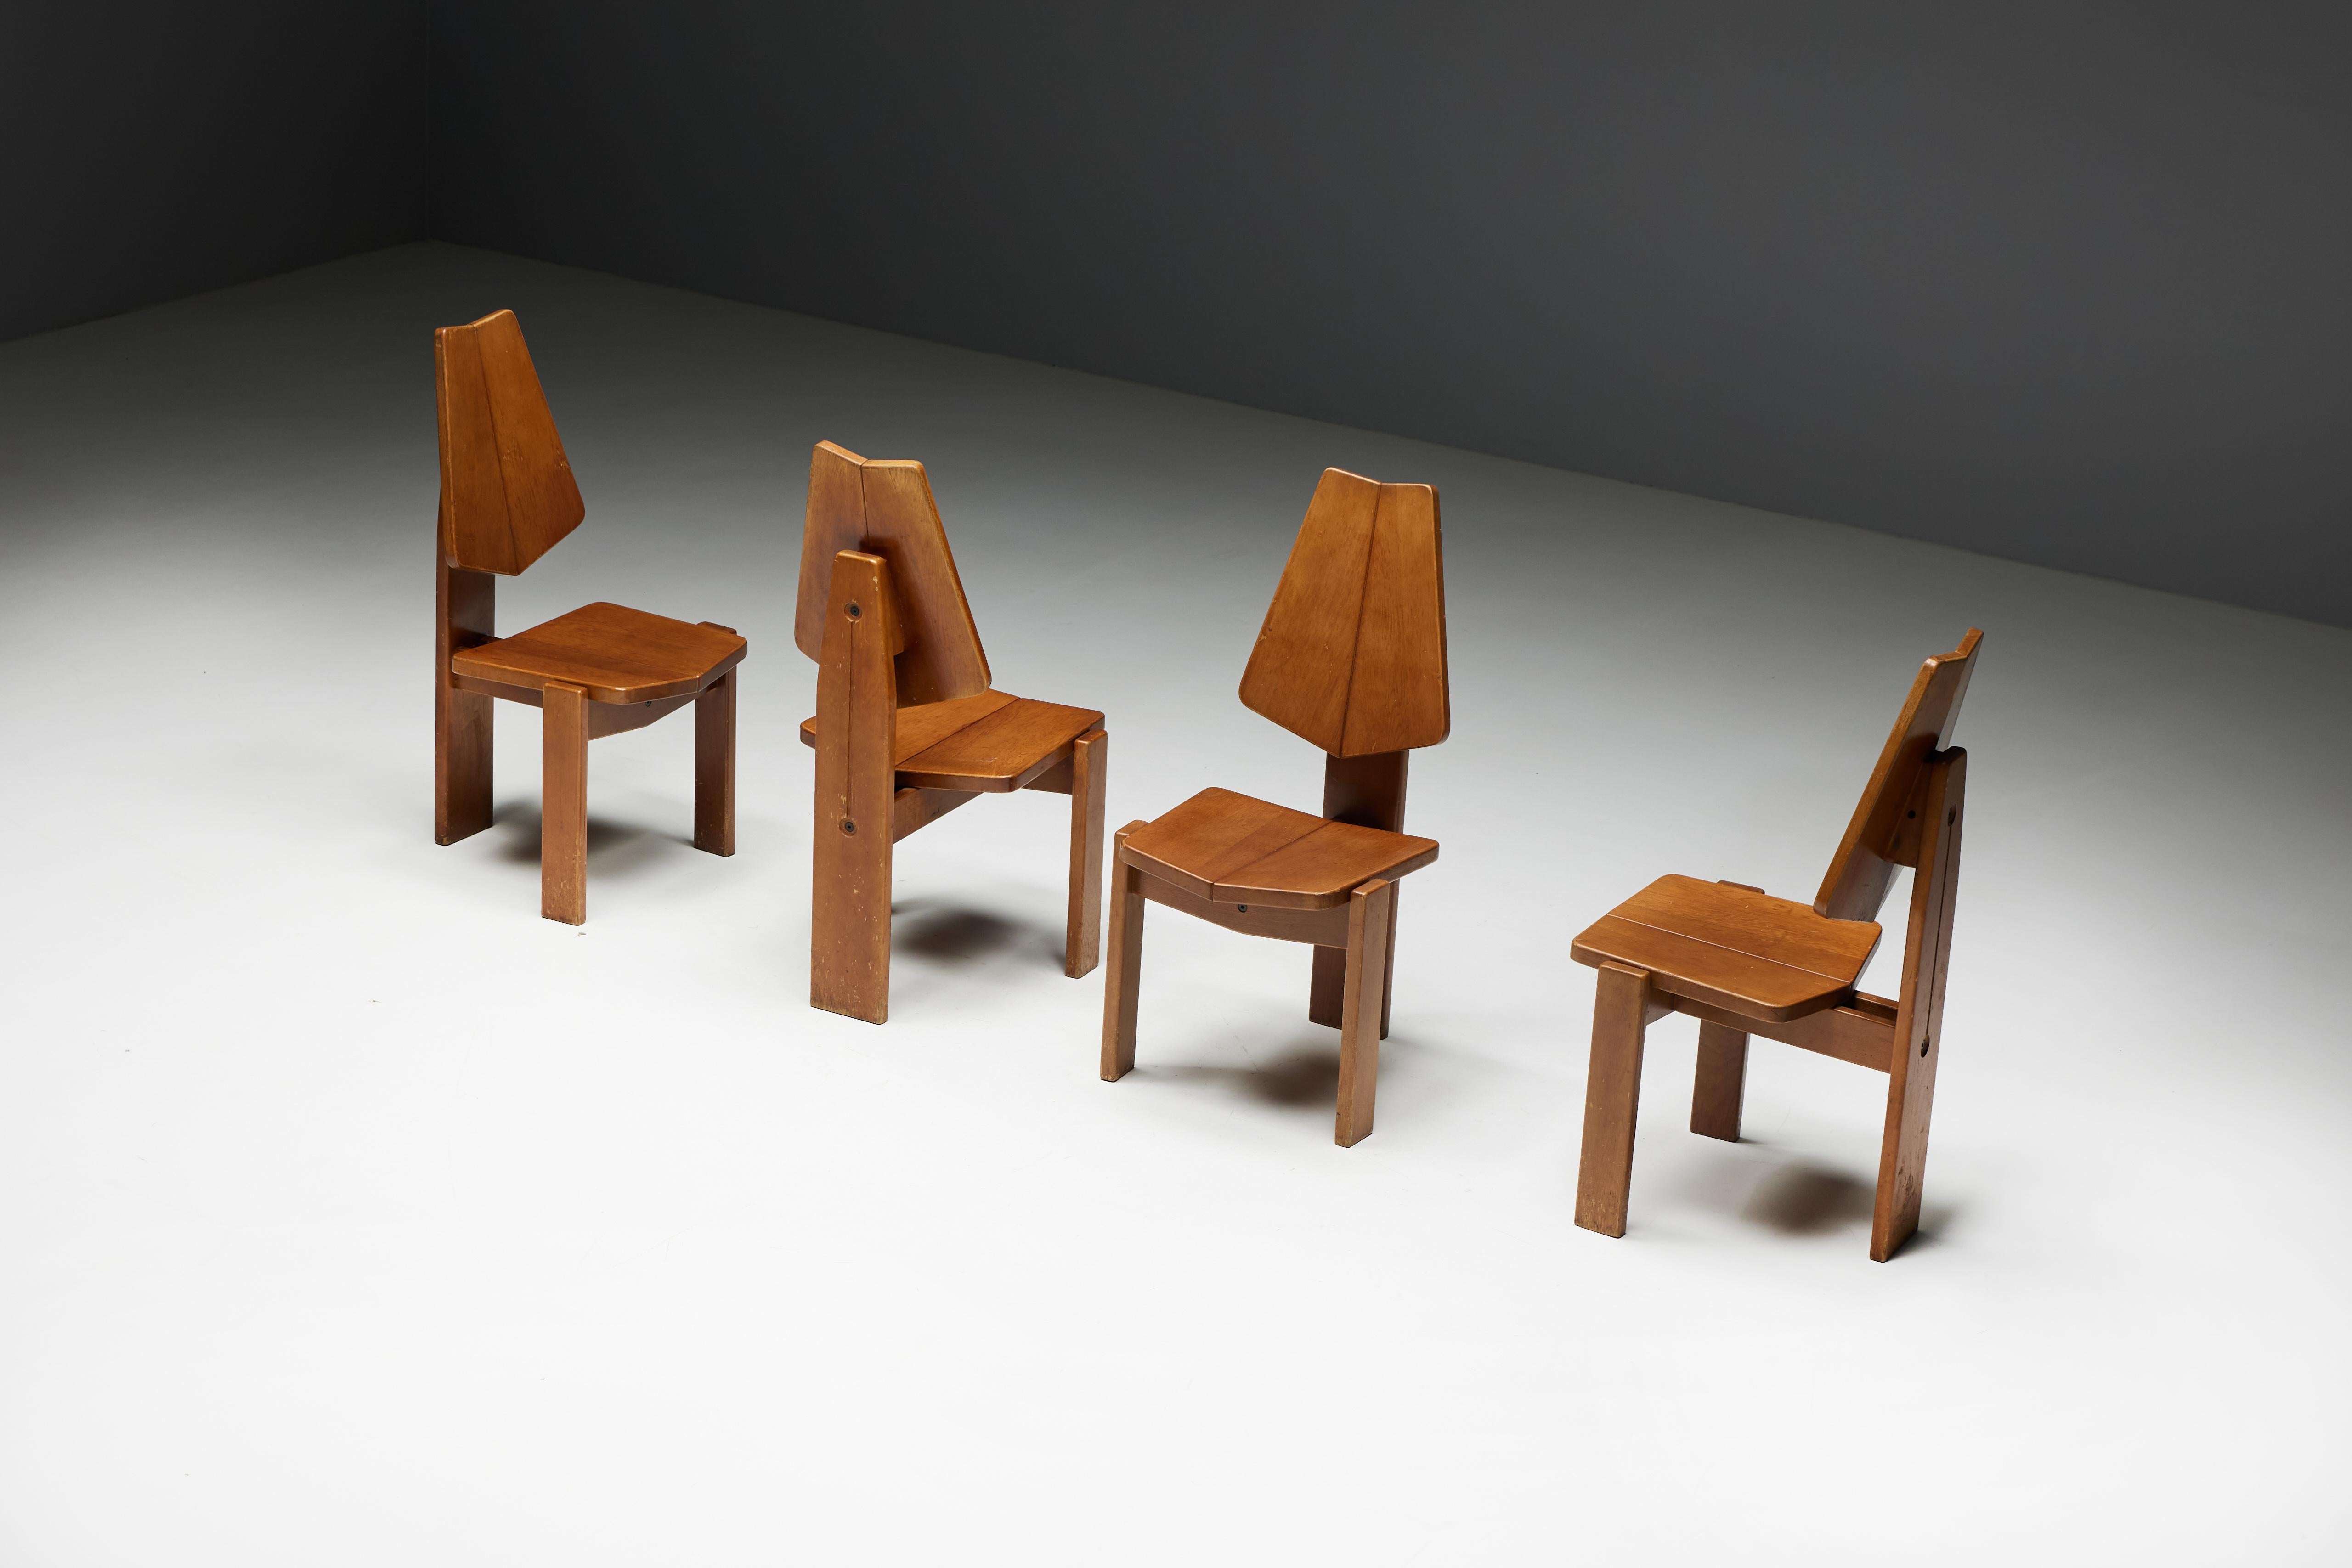 Brutalist Wooden Dining Chairs, Belgium, 1970s For Sale 1